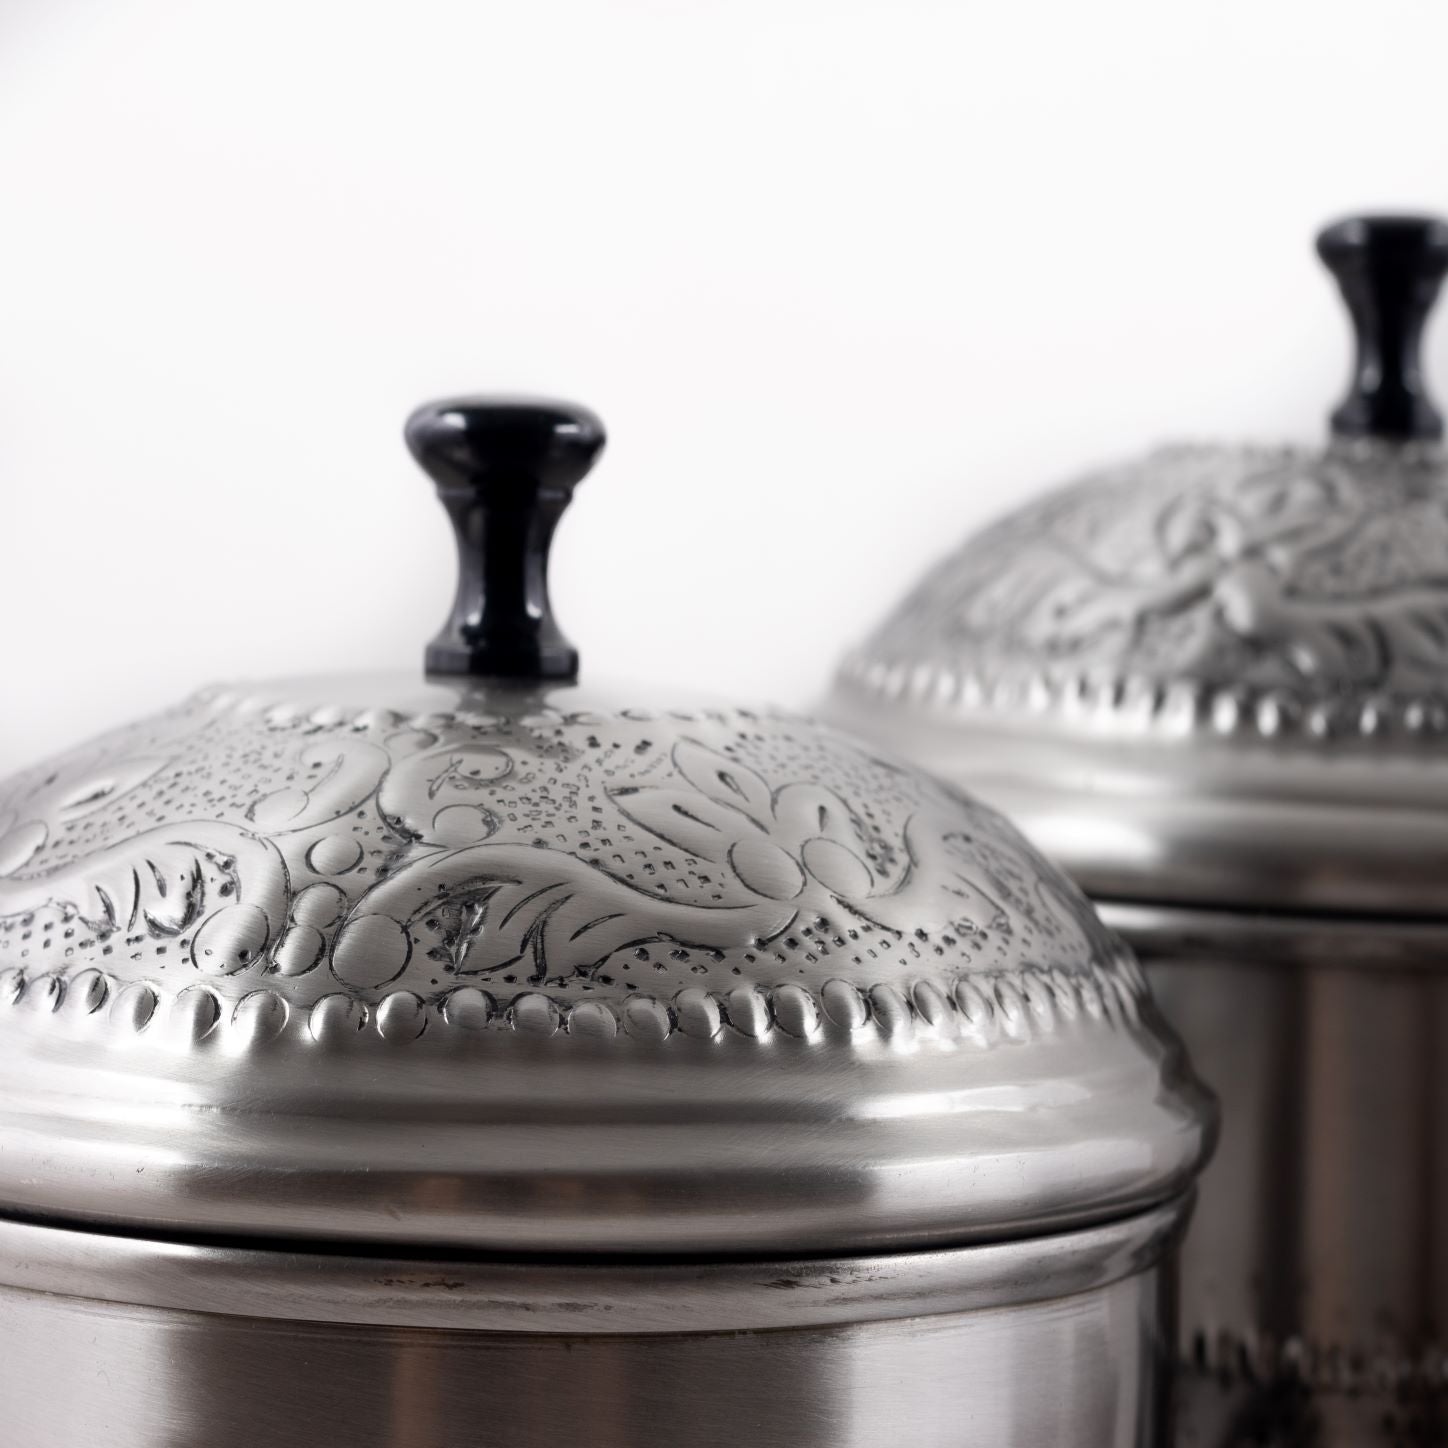 Embossed Antique Canisters